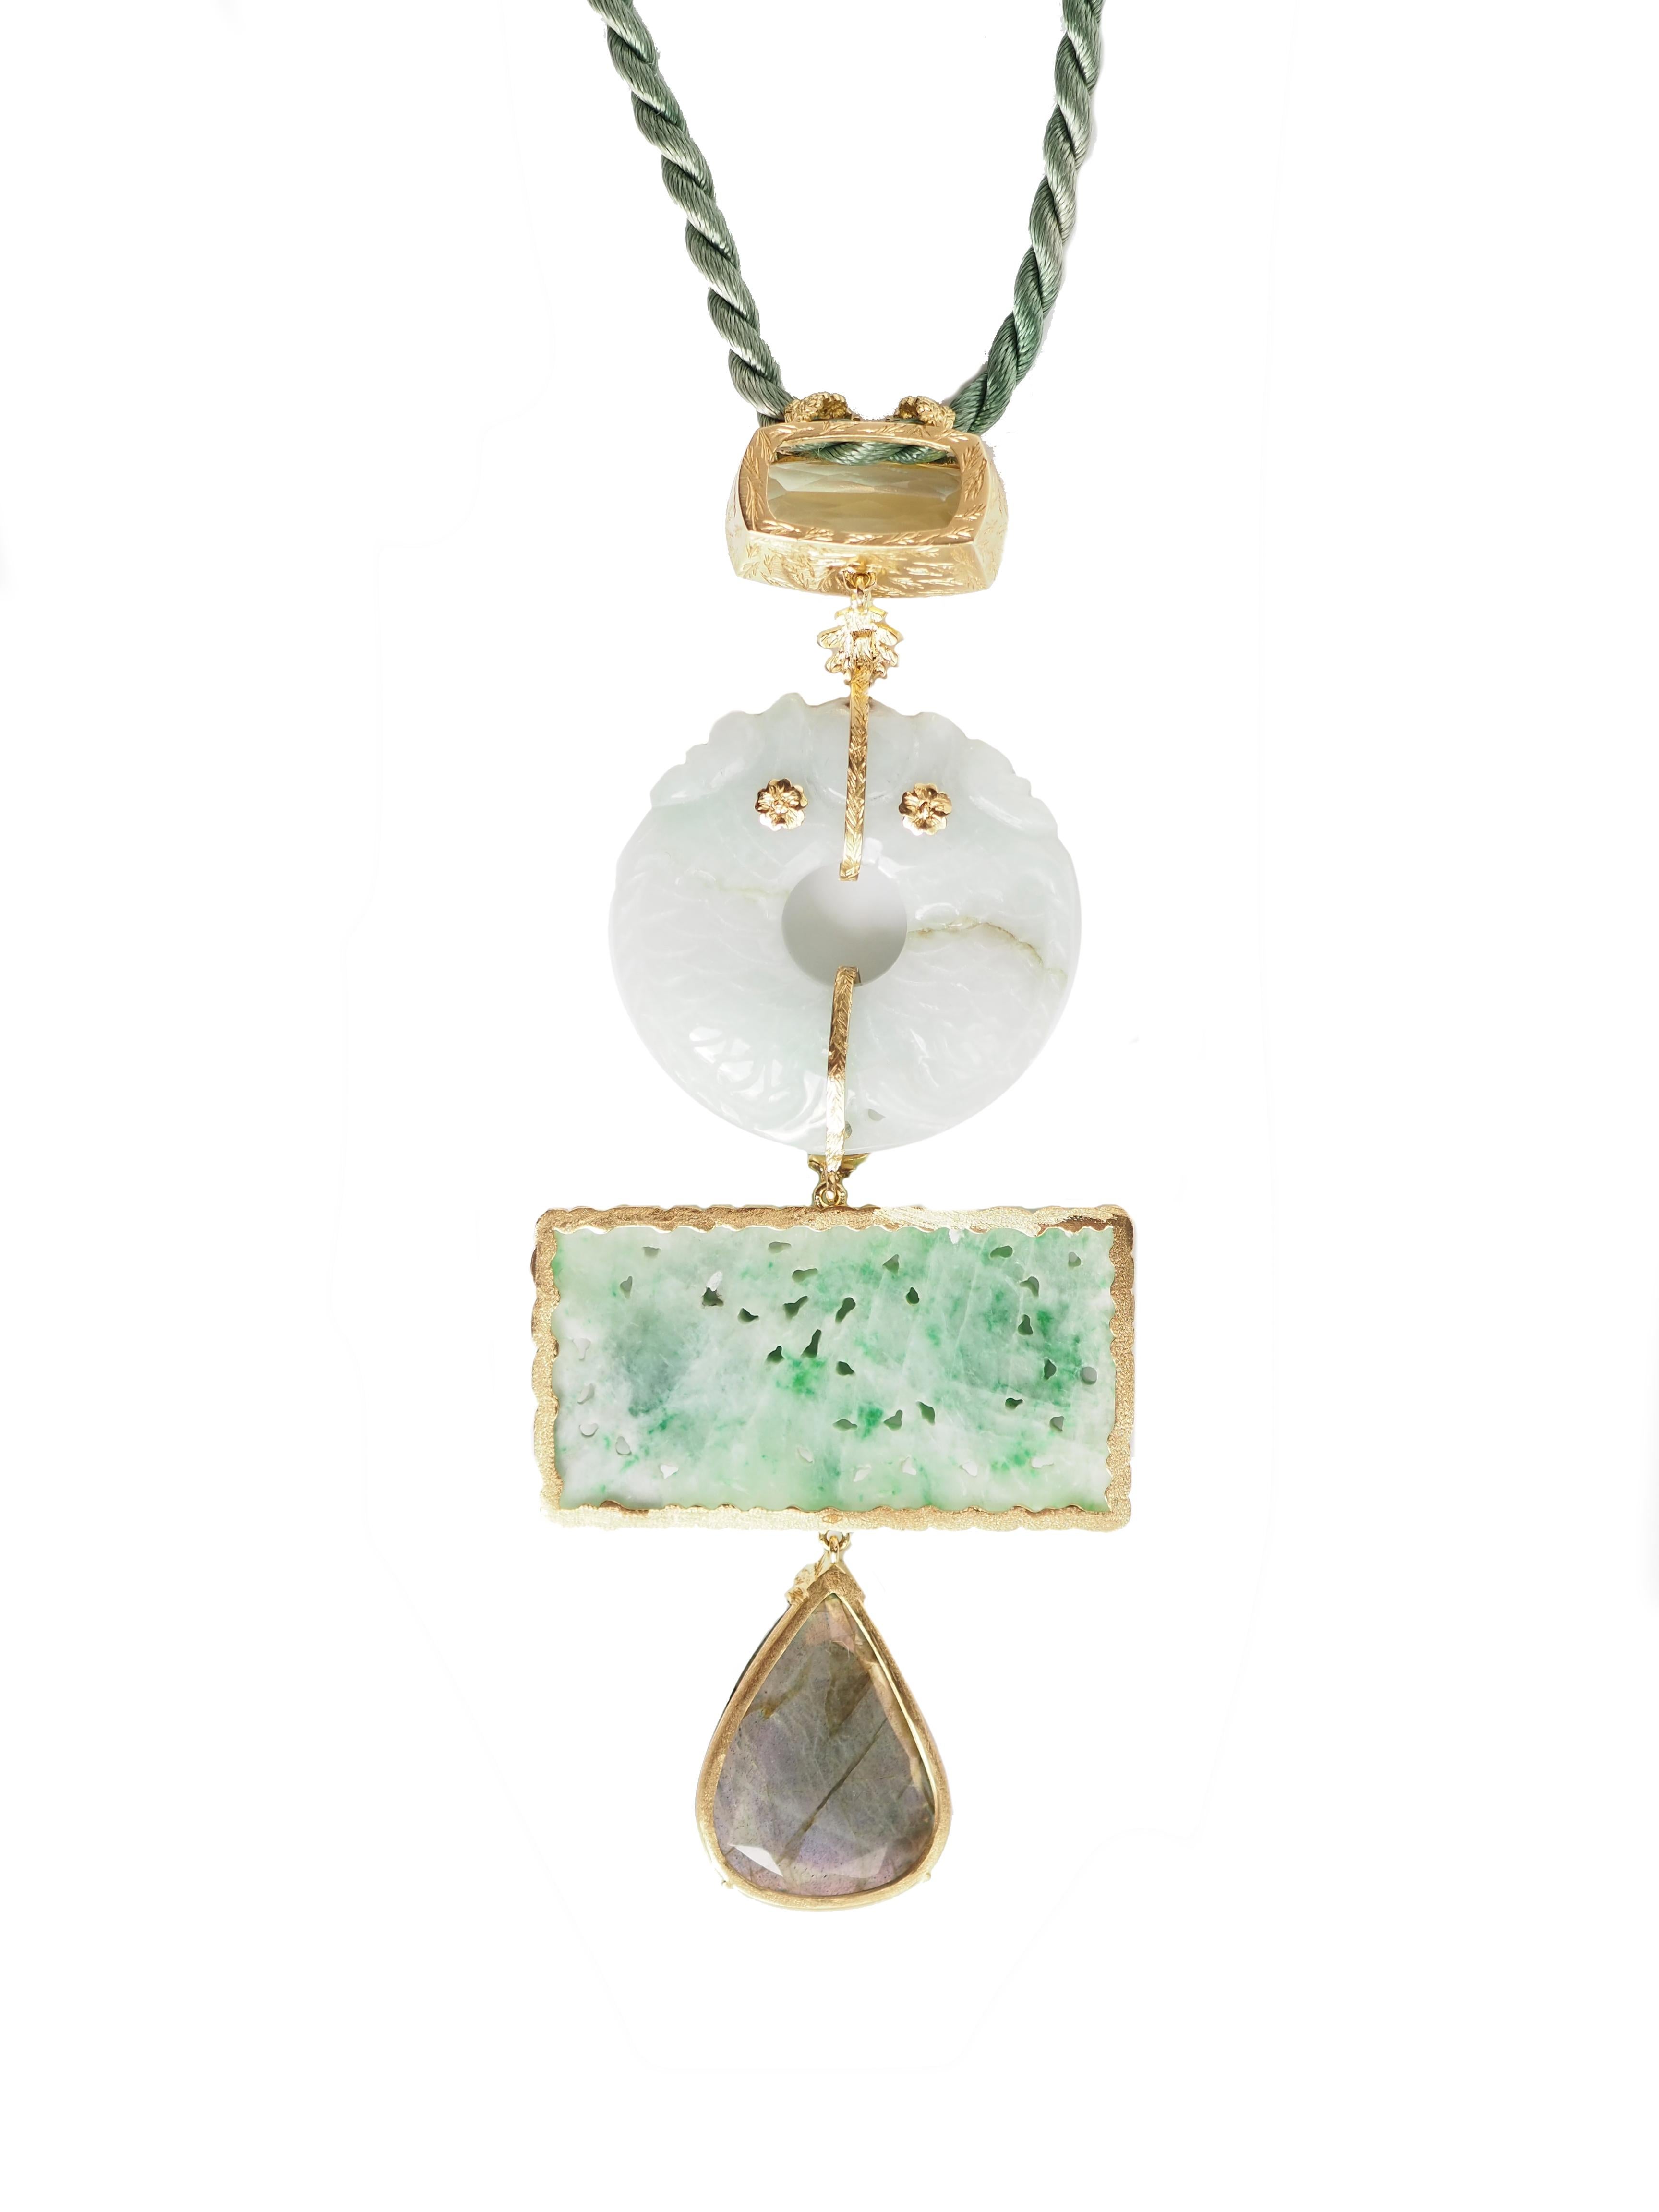 Antiques jade pieces, 18 kt gold gr. 22,80, labradorite faced drop, citrine stone.
You can wear with your own gold necklace or silk string. the pendant is about 9cm long.
All Giulia Colussi jewelry is new and has never been previously owned or worn.